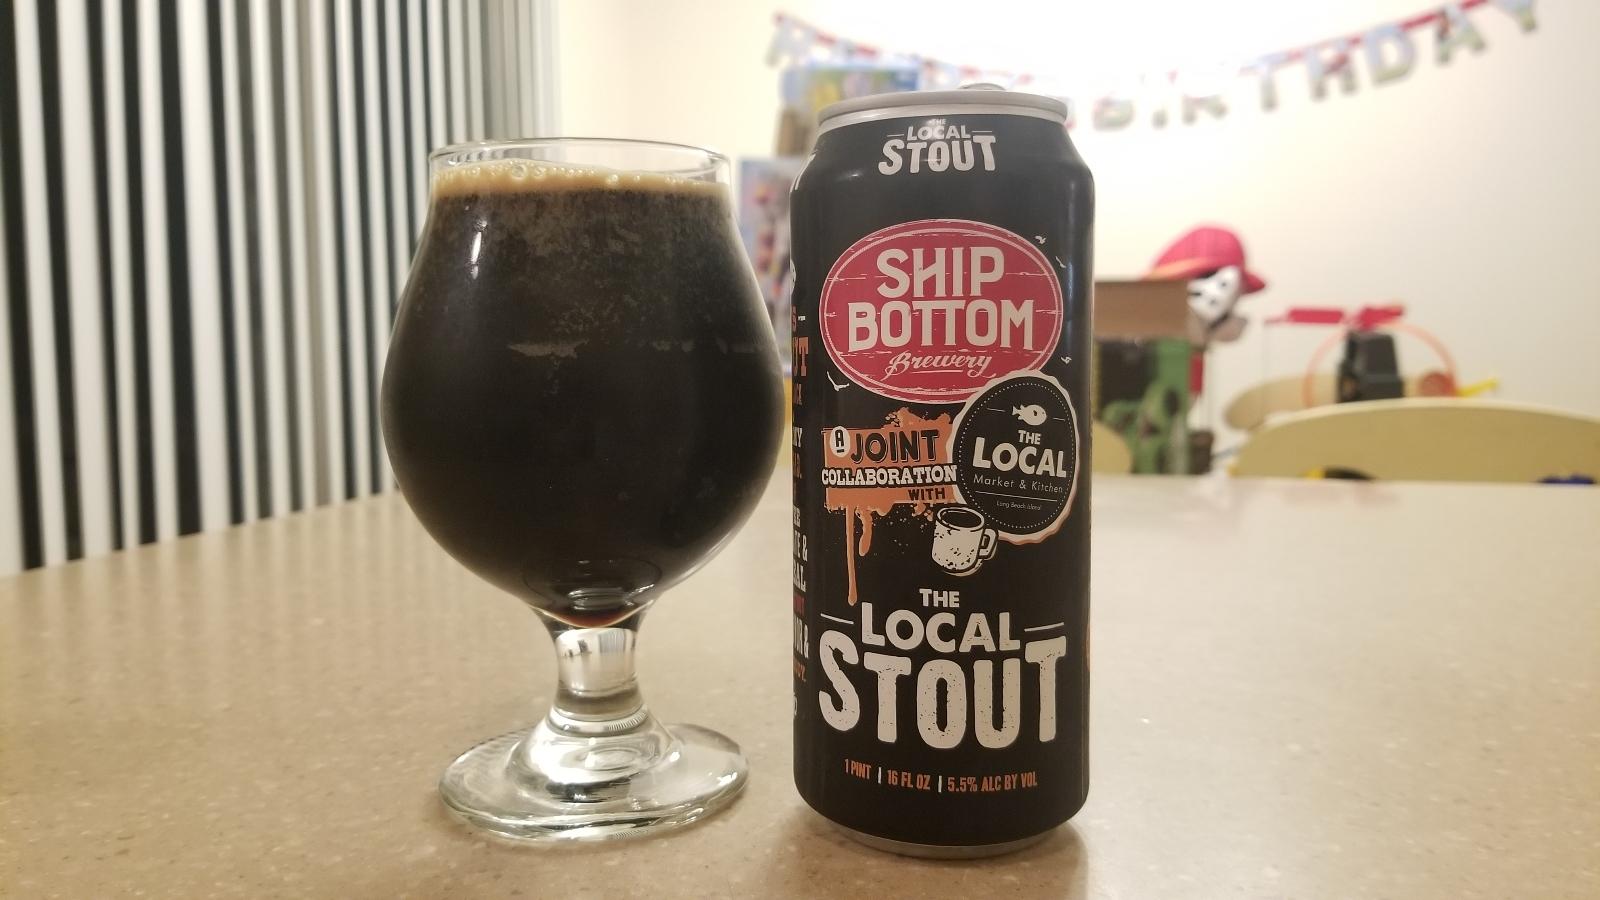 The Local Stout